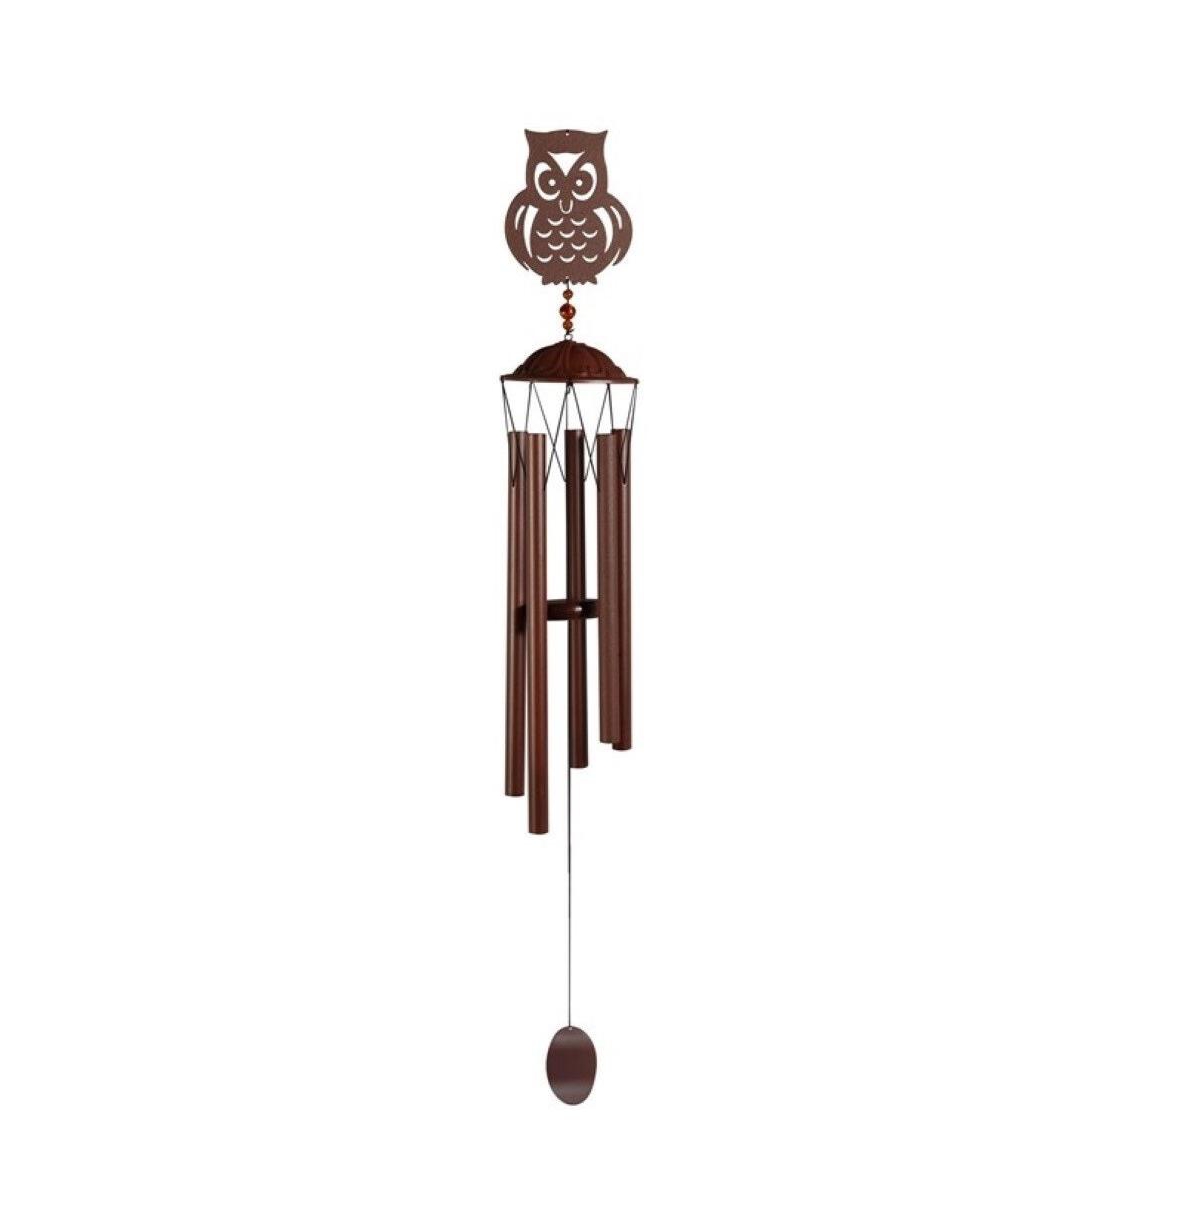 38" Long Metal Brown Owl Silhouette Wind Chime Home Decor Perfect Gift for House Warming, Holidays and Birthdays - Brown